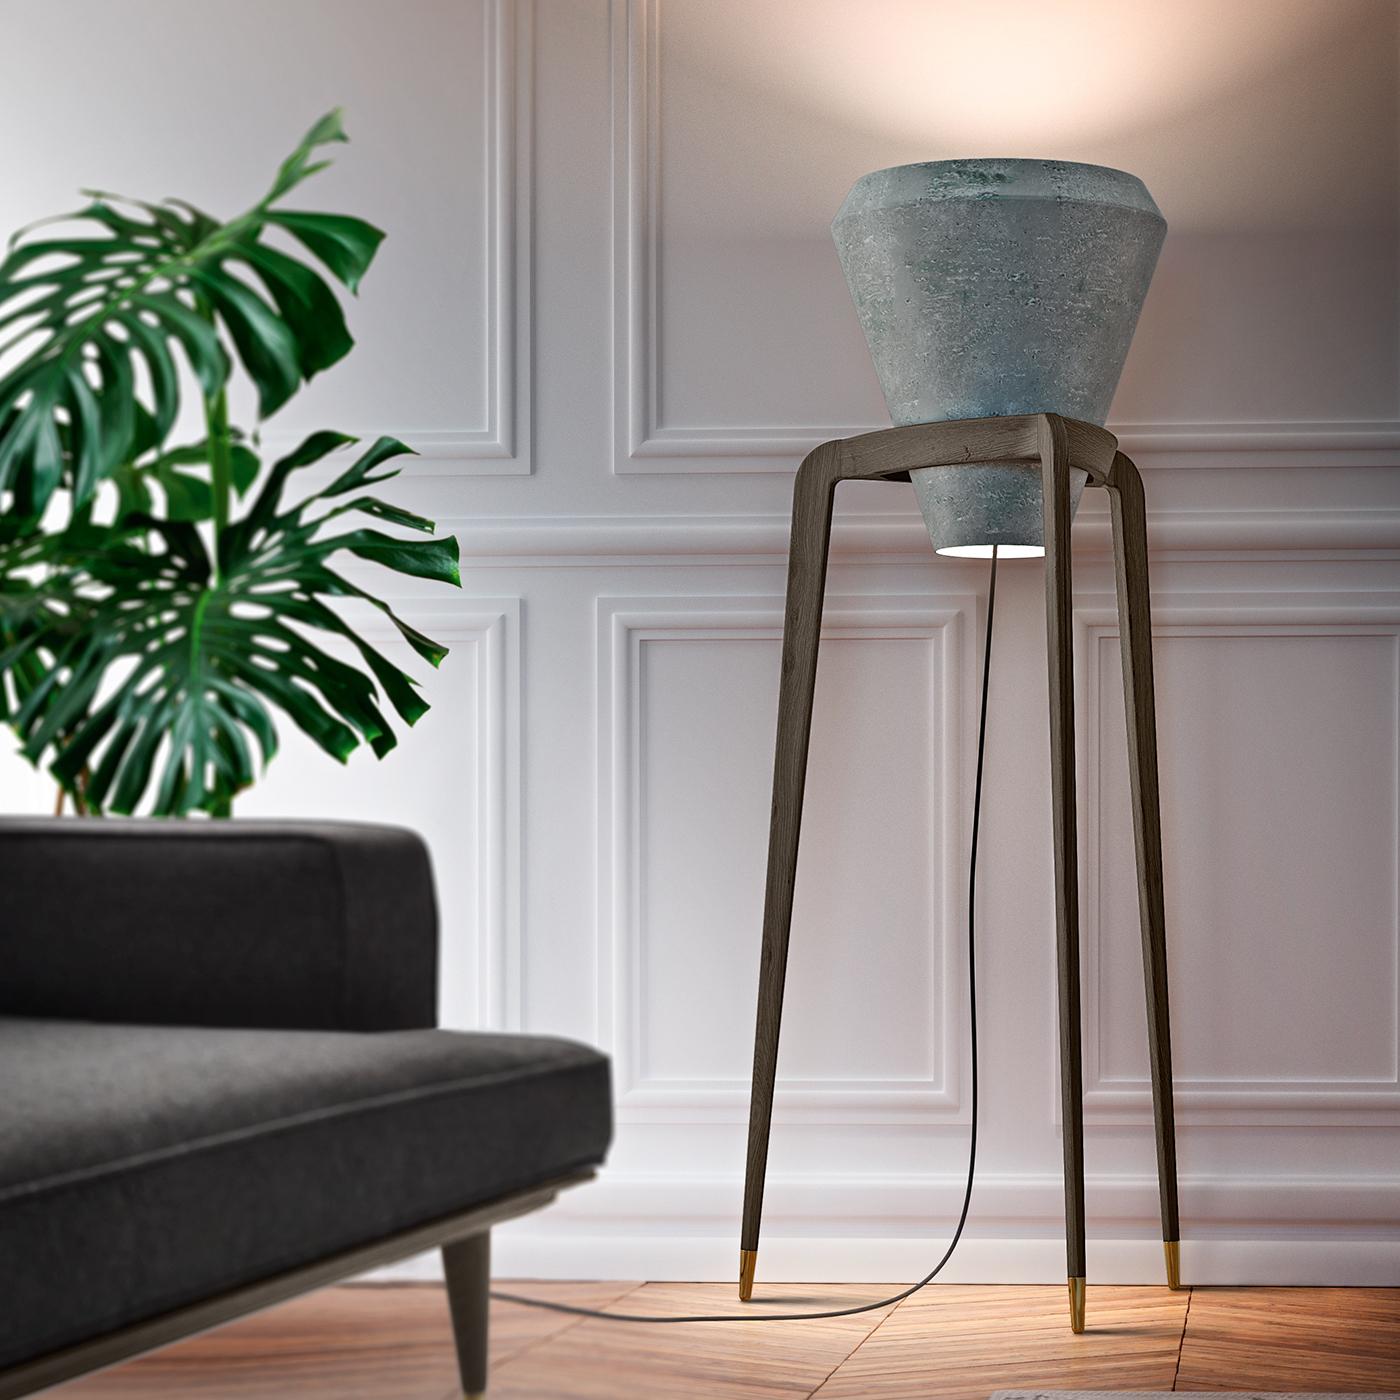 This exquisite floor lamp combines contrasting materials in a unique silhouette of strong visual impact. Its solid durmast structure comprises three tapered legs ending in gold-finished brass tips, while the top forms a ring on which is mounted the